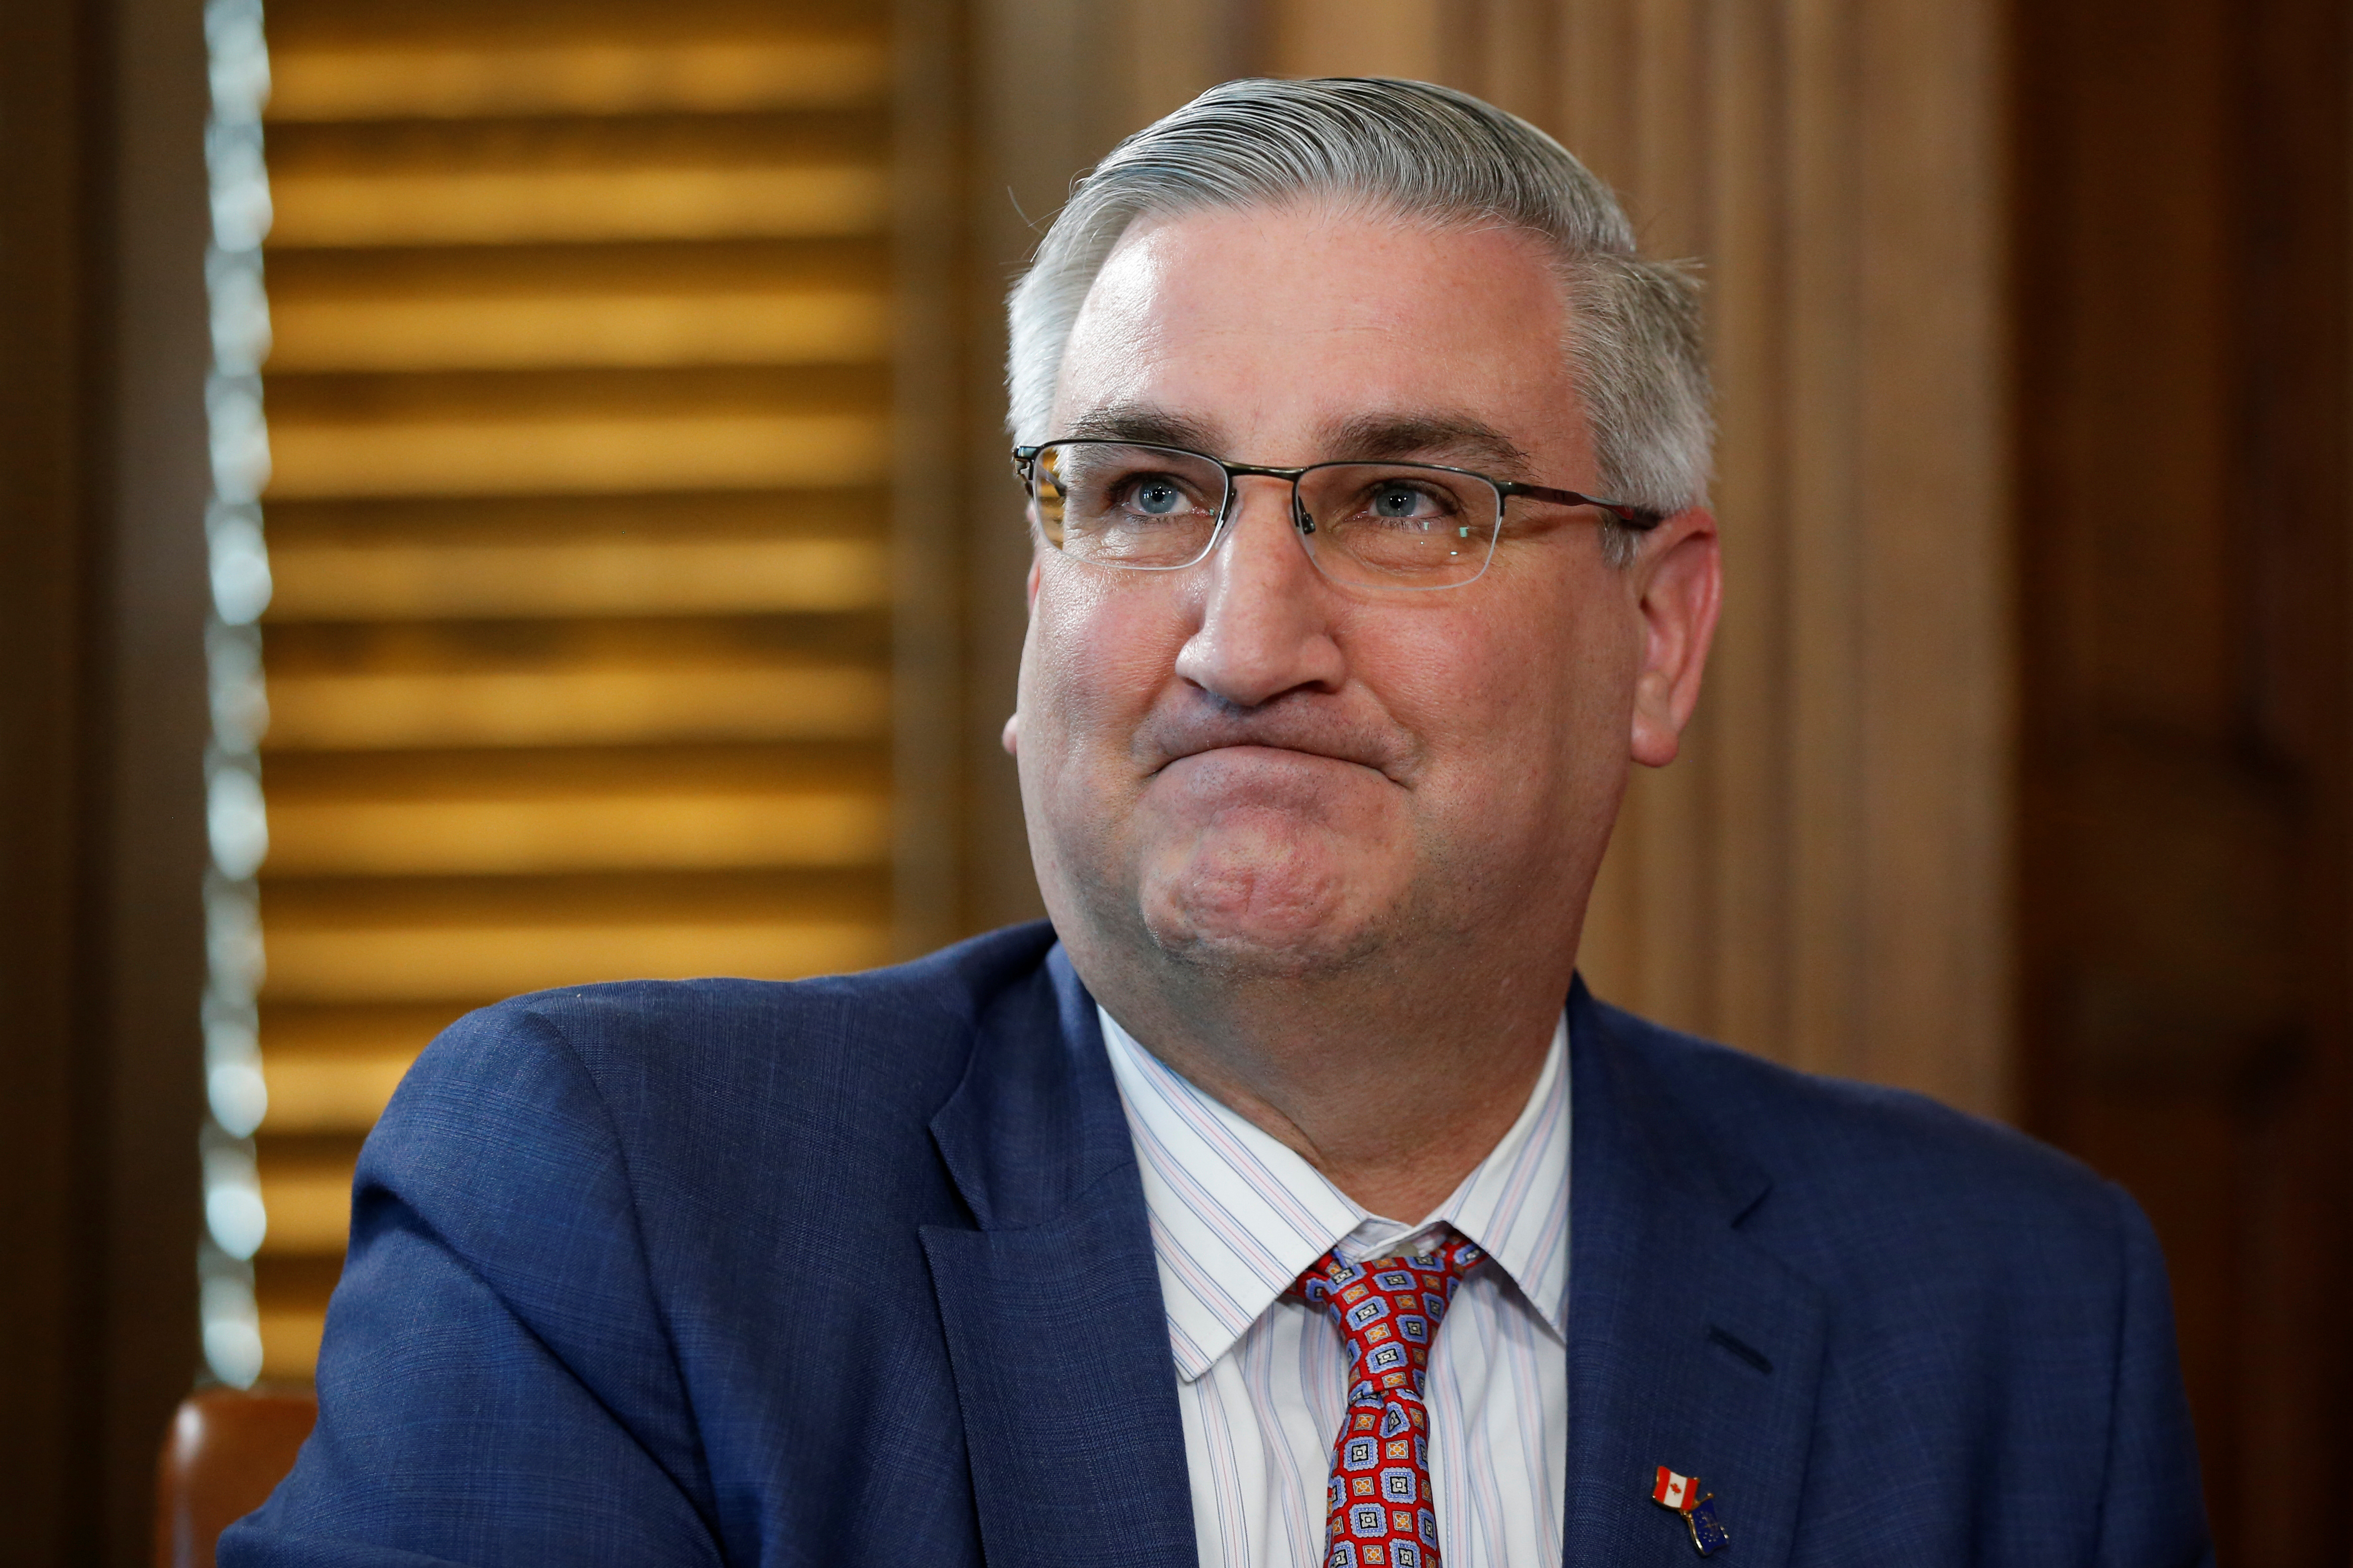 Indiana Gov. Eric Holcomb is Latest U.S. Official to Visit Taiwan Amid China Tensions